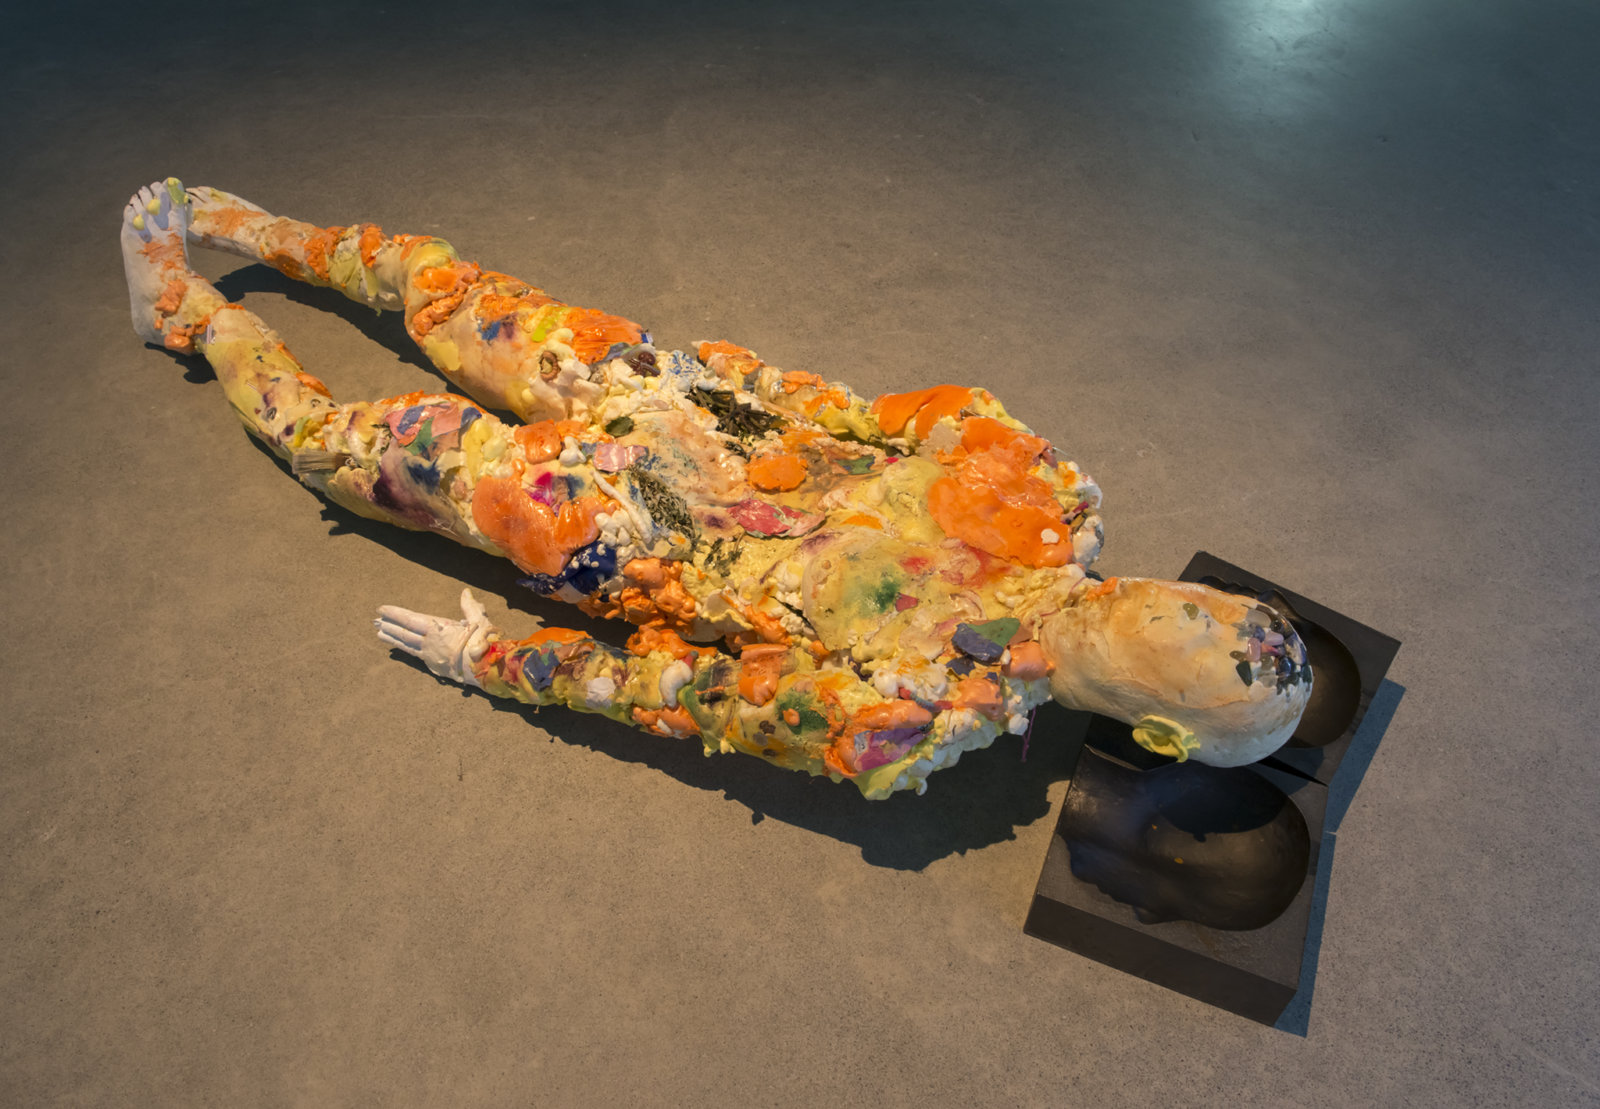 Kasper Feyrer, Corpse, Maiden, 2018, insulation foam, whistle, glass marbles, mineral rocks, broken rulers, coins, lenses, blackberry, mugwort, rope, hinges, gummy worms, plaster cast hands and feet, soil, aluminum armature, latex, pigment, paper, cast iron, miscellaneous materials, 71 x 28 x 13 in. (180 x 71 x 33 cm)